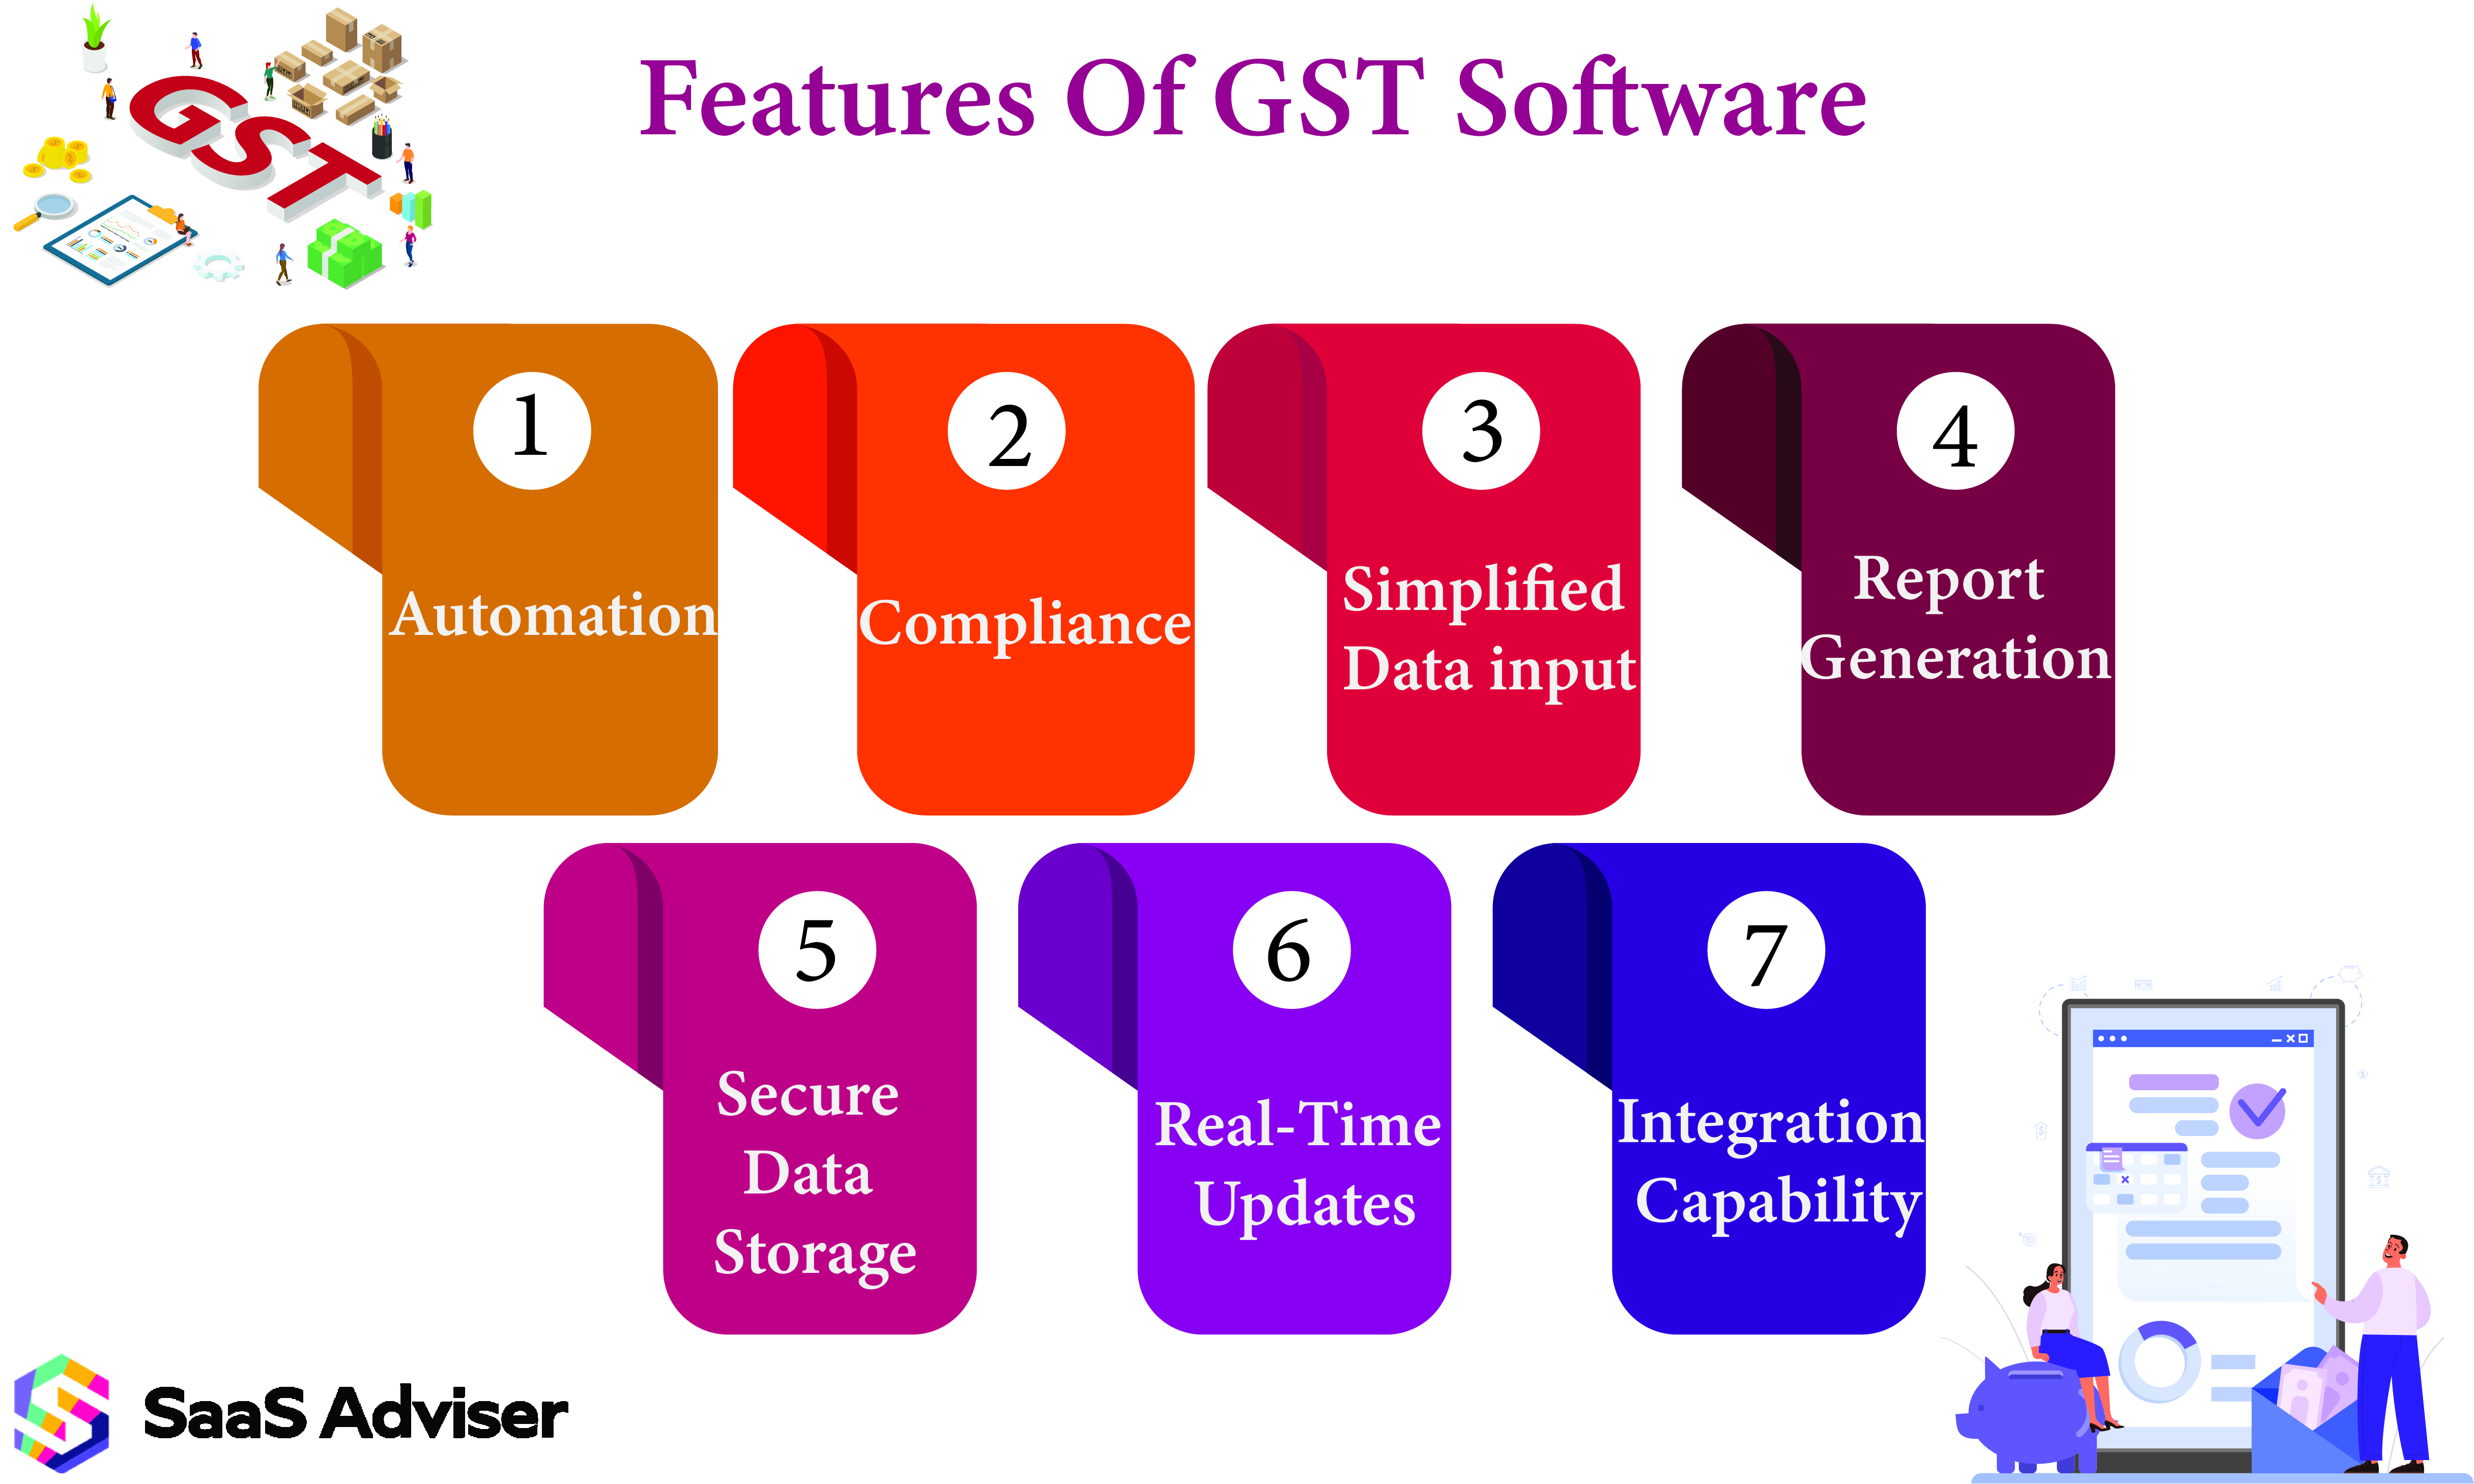 Features Of GST Software